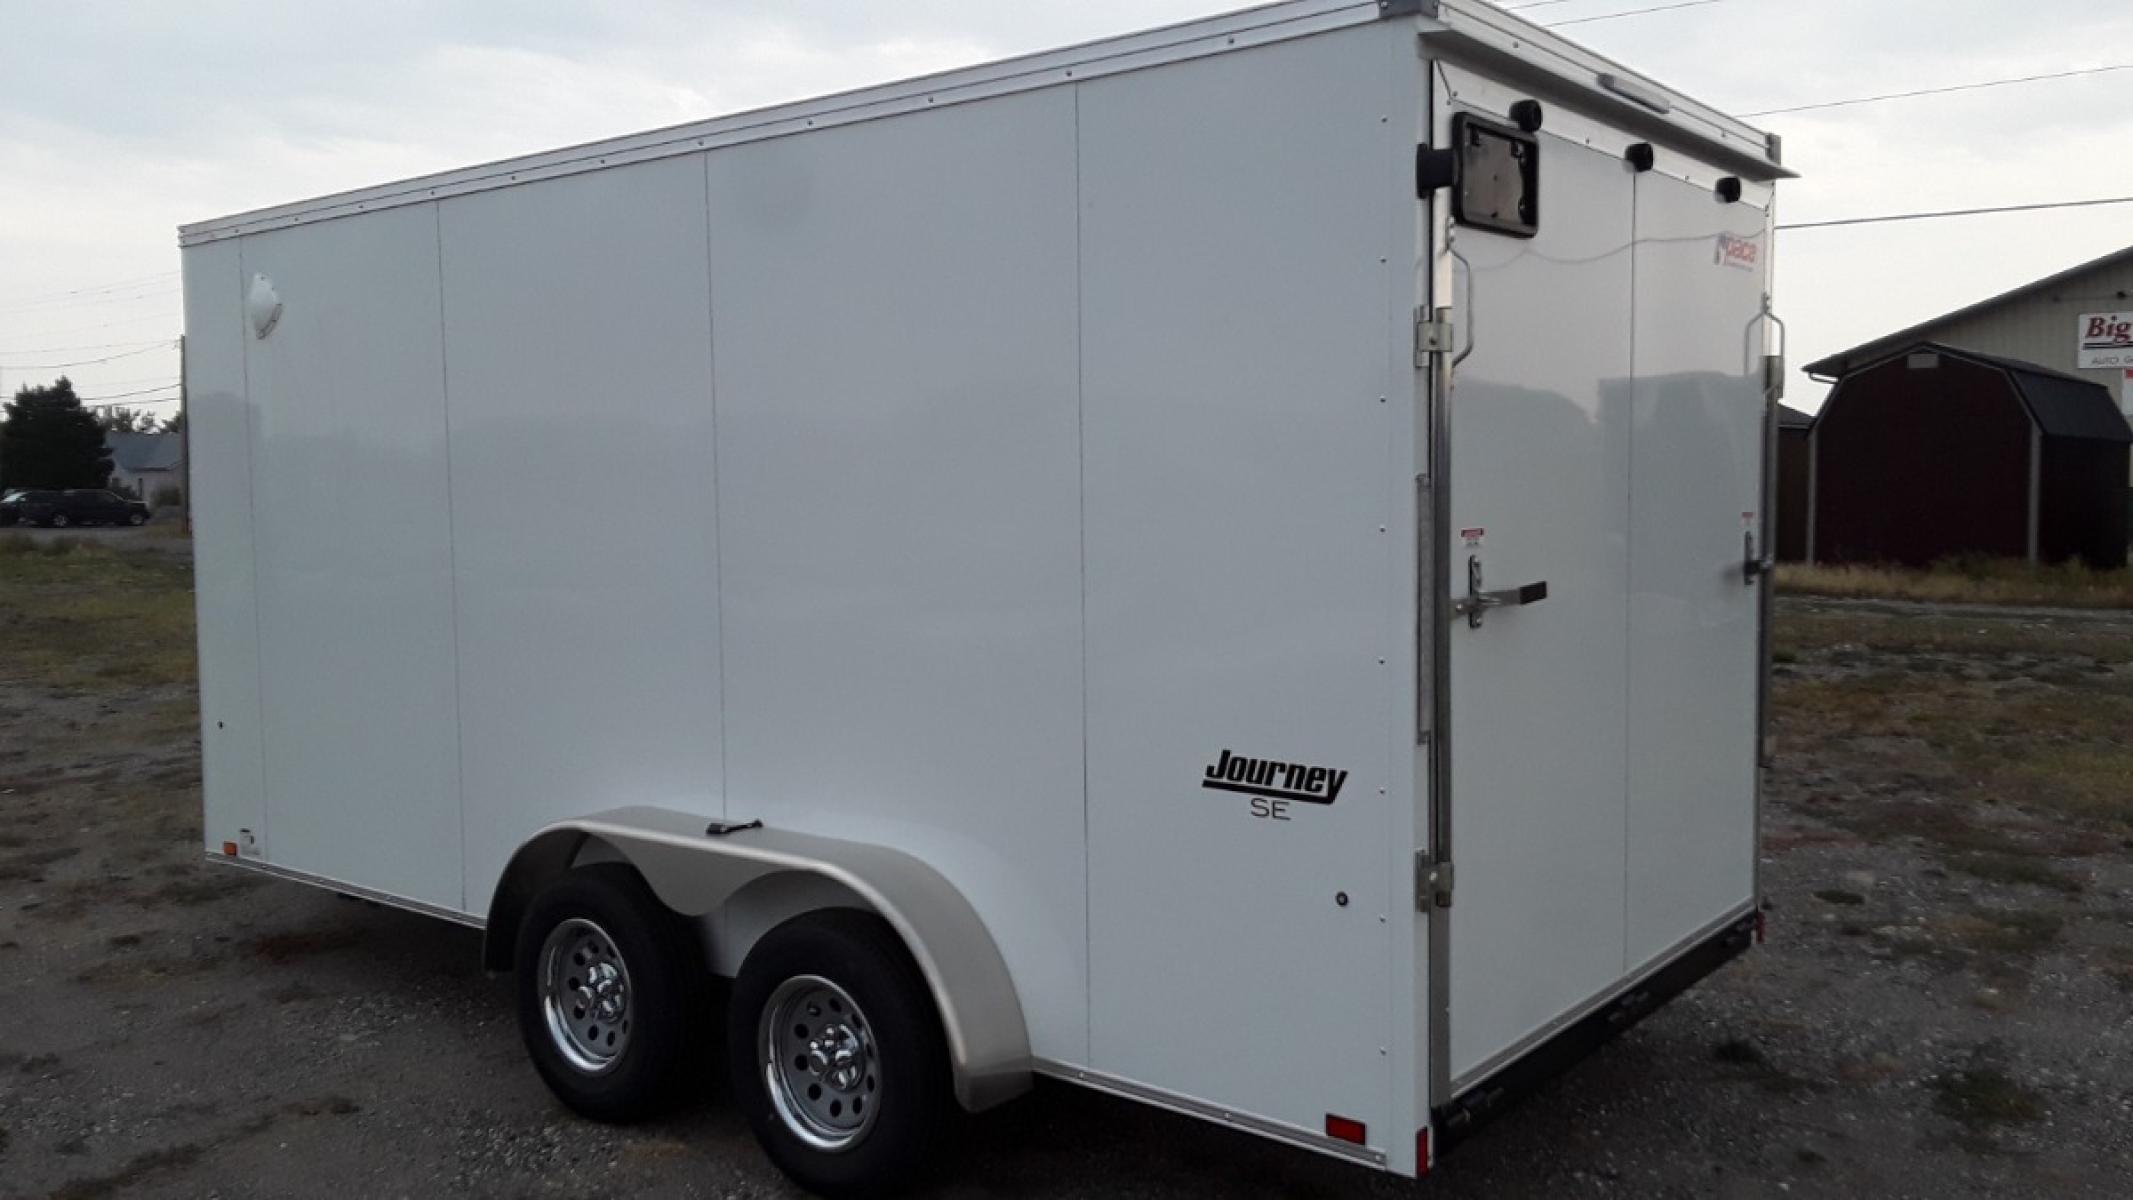 2022 Pewter Pace 7 x 16 Journey SE , located at 310 West 1st Ave, Big Timber, MT, 59011, (406) 860-8510, 45.833511, -109.957809 - NEW PACE 7 X 16 JOURNEY SE V-NOSE CARGO TRAILER, 7K GVW, 78" REAR OPENING DOOR HEIGHT, TUBE SIDEWALL SUPPORTS ON 16" CENTERS, FLOOR CROSSMEMBERS ON 16" CENTERS, SCREWLESS EXTERIOR, TUBE FRAME CONSTRUCTION W- 3 YEAR WARRANTY, 15" RADIAL TIRES, EZ LUB HUBS, REAR RAMP DOOR, FLUSH MOUNTED RV SIDE DOOR W - Photo #1